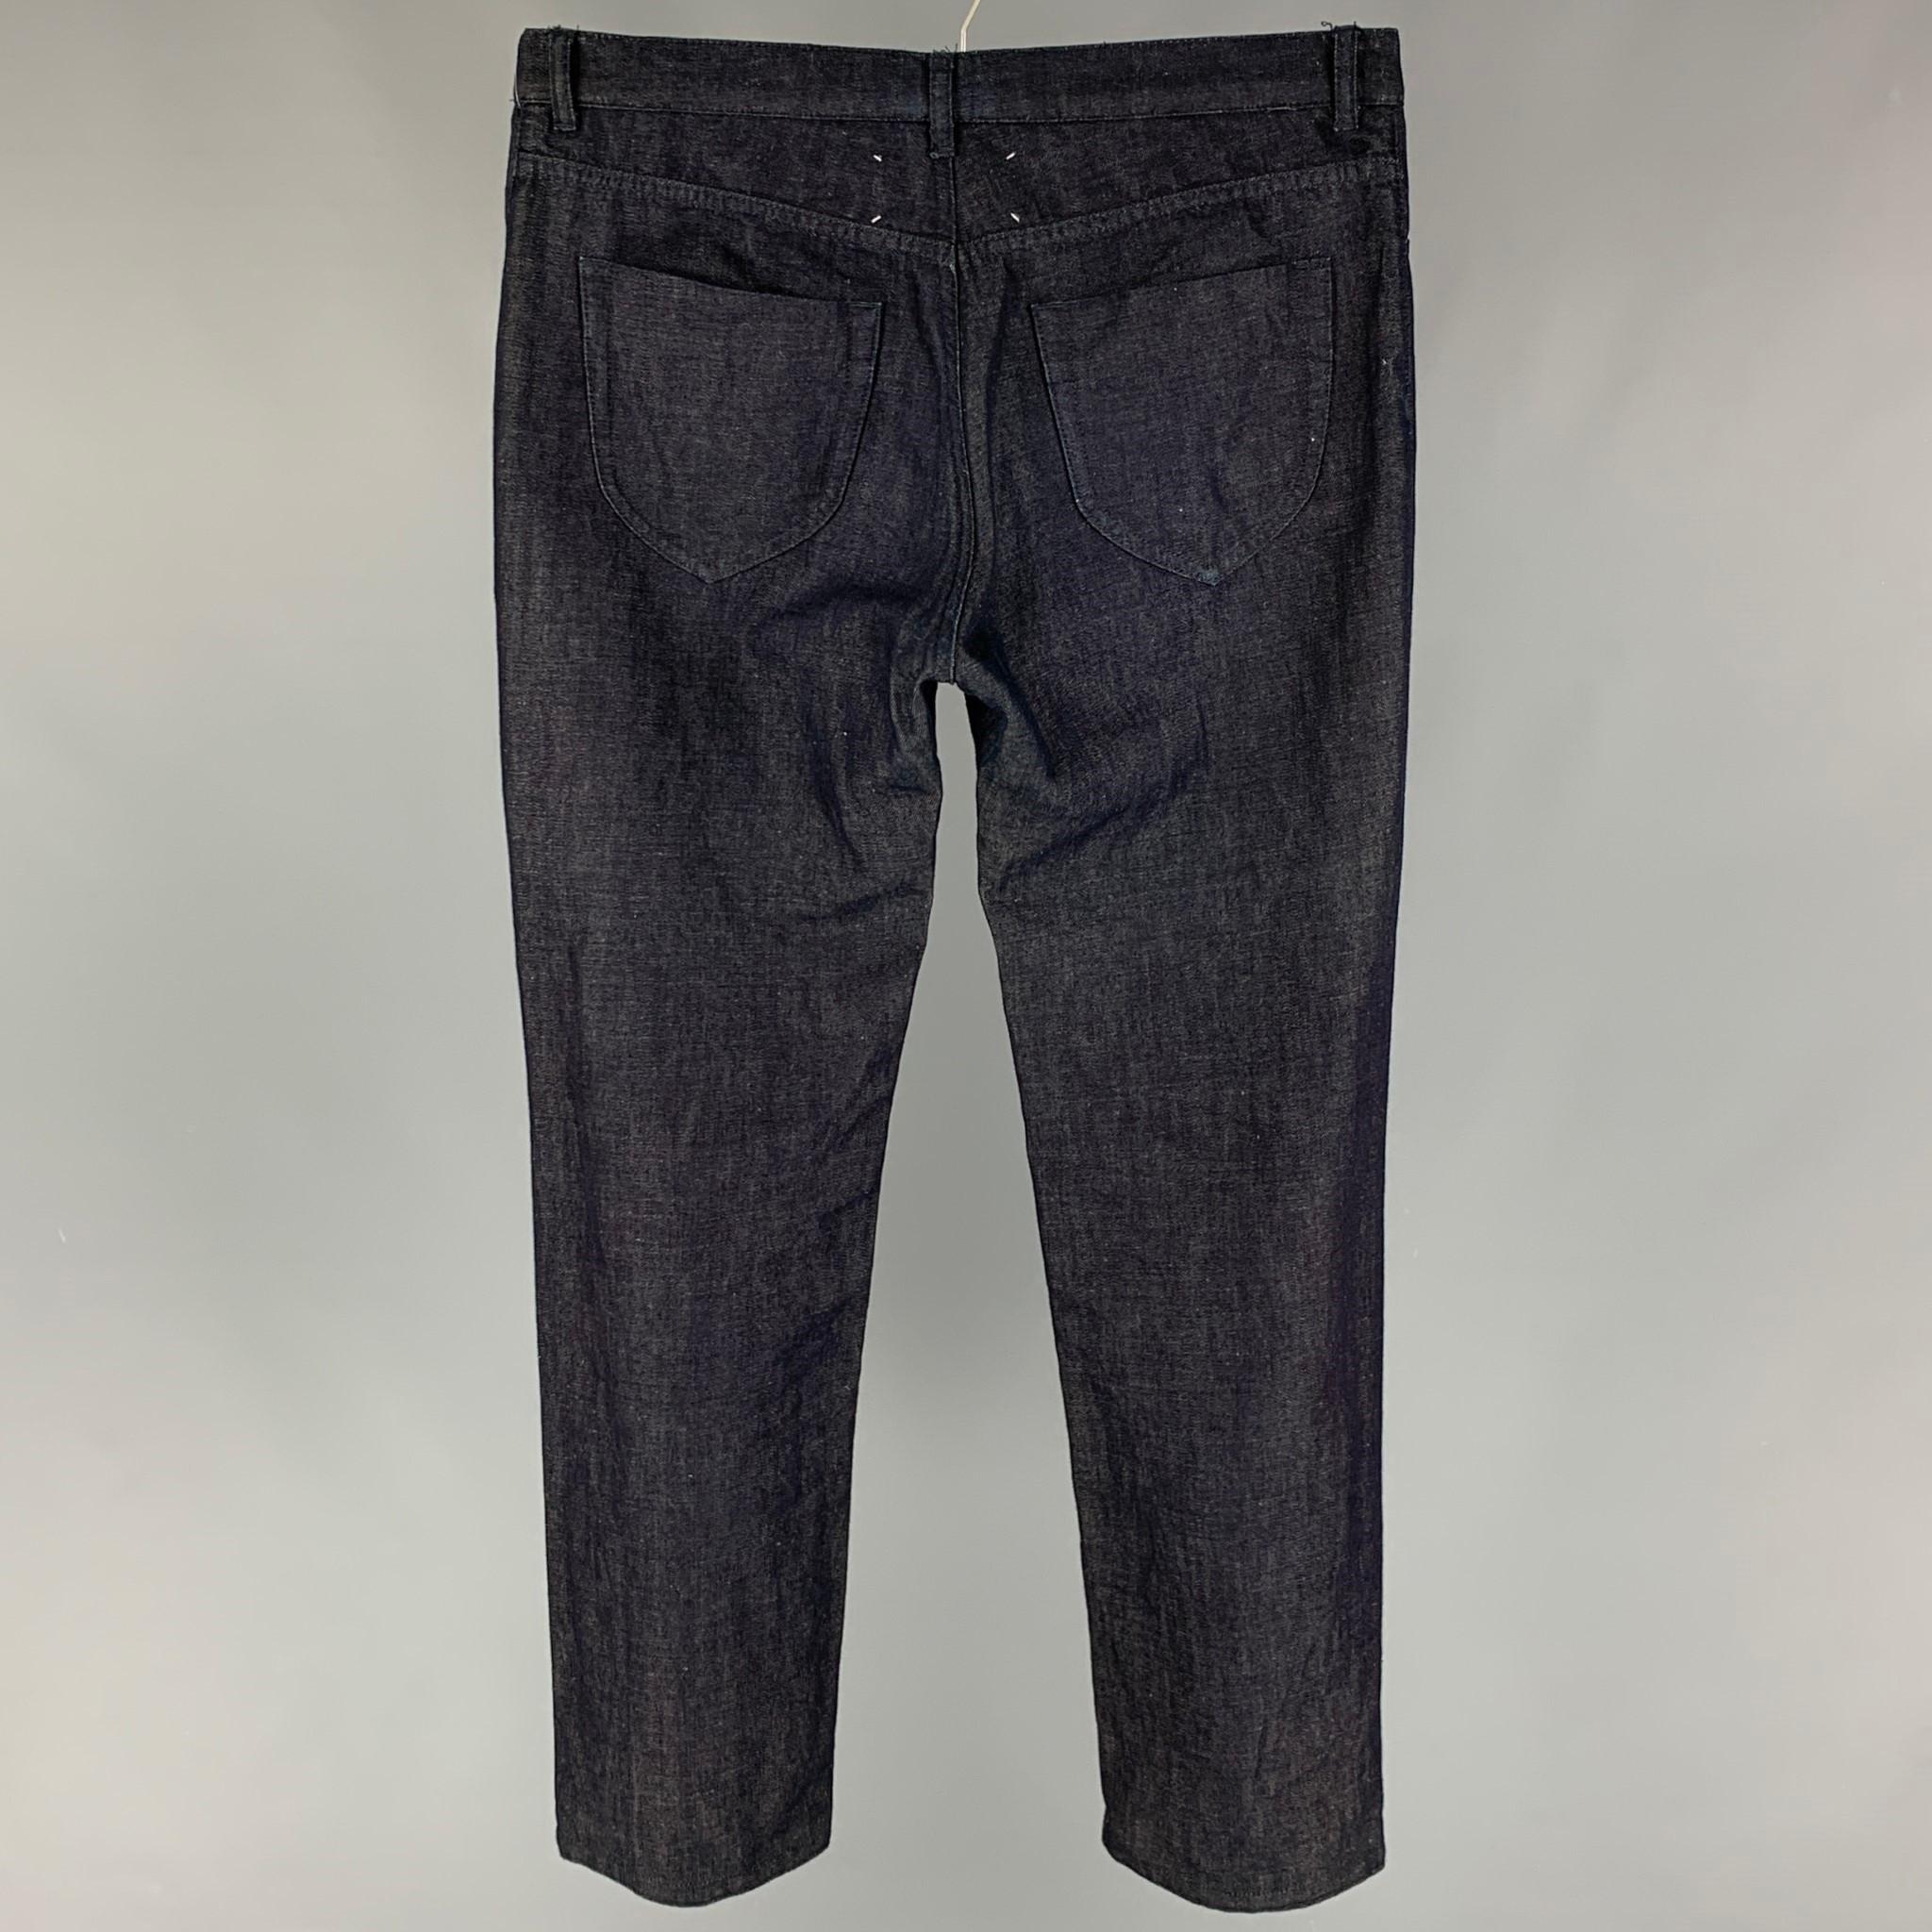 MAISON MARGIELA pants comes in a indigo cotton featuring a regular fit, straight leg, and a button fly closure. Made in Italy. 

Very Good Pre-Owned Condition.
Marked: 50

Measurements:

Waist: 34 in.
Rise: 10 in.
Inseam: 29 in. 